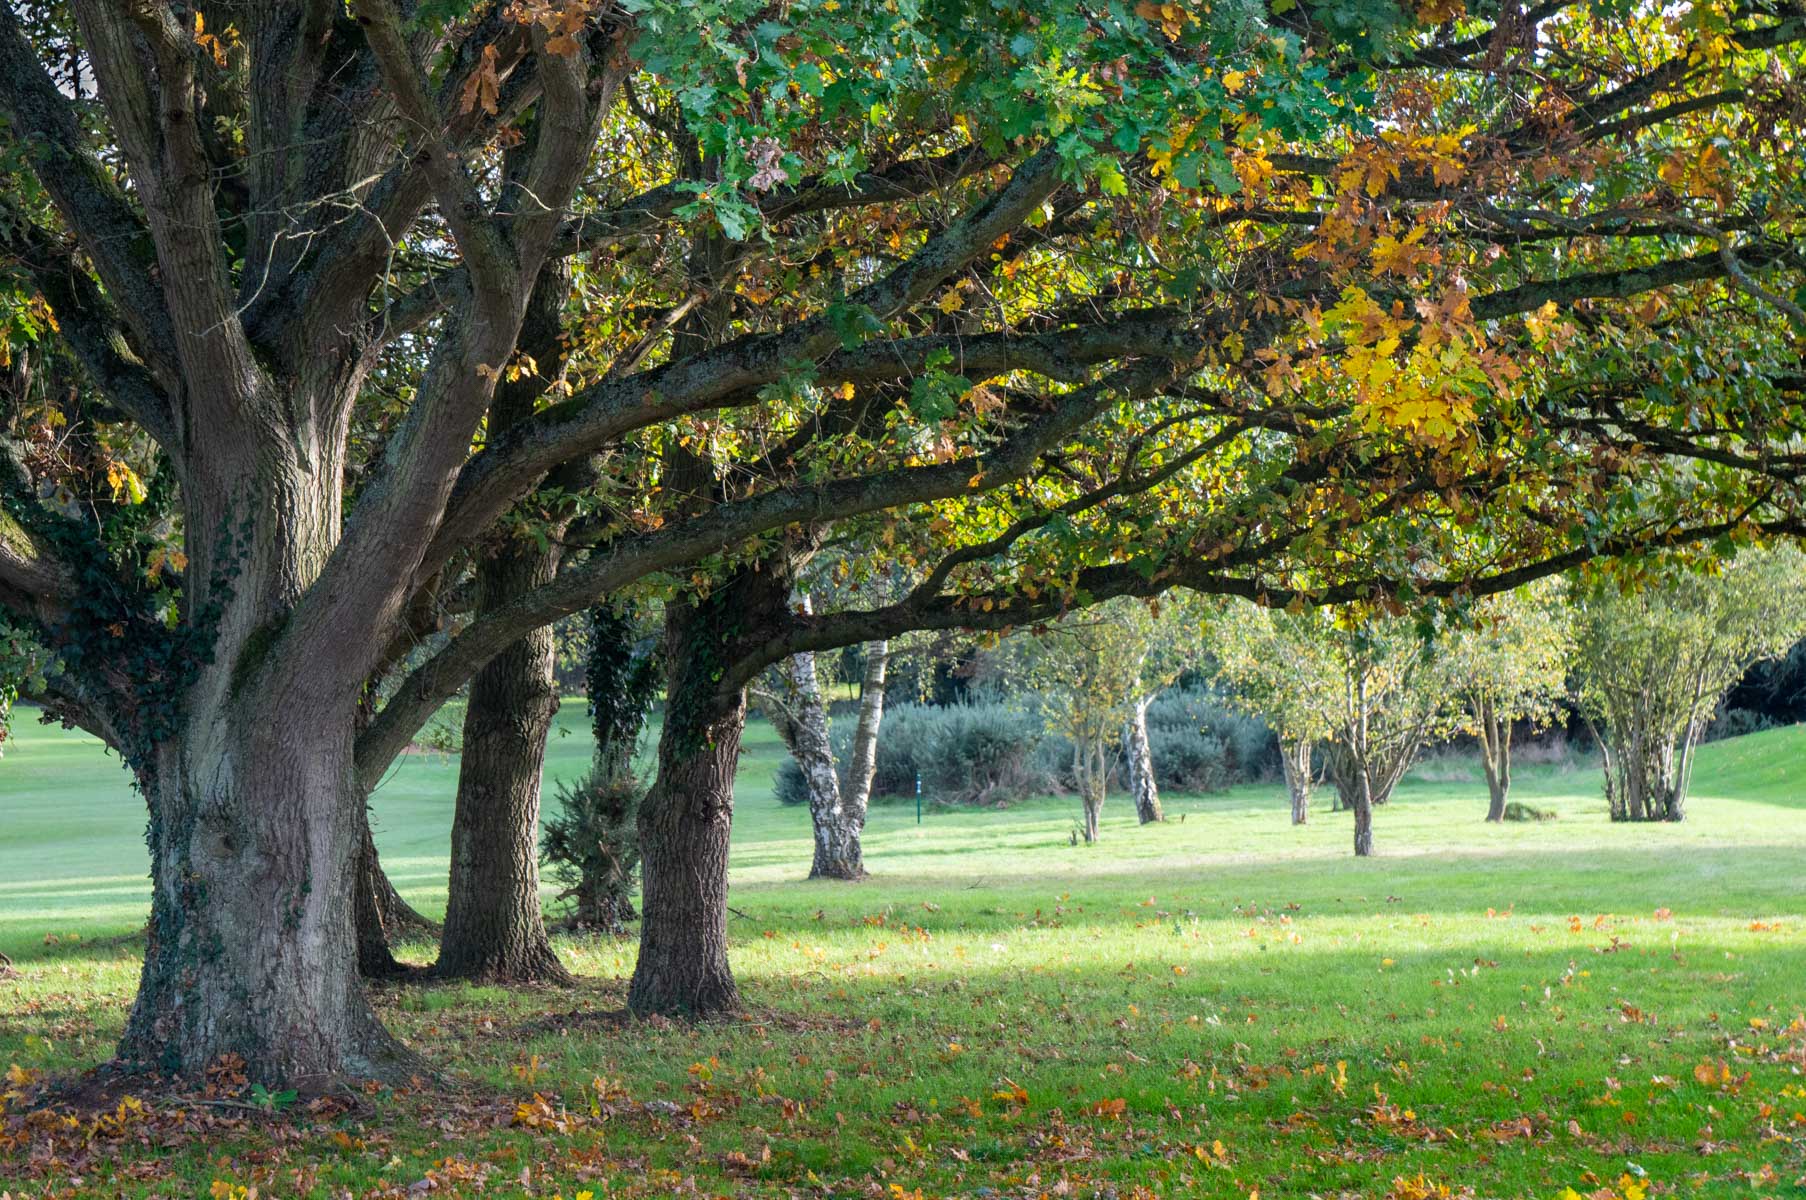 Thousands of trees will be cut down at Maidenhead golf course if Cala Homes' plans are approved